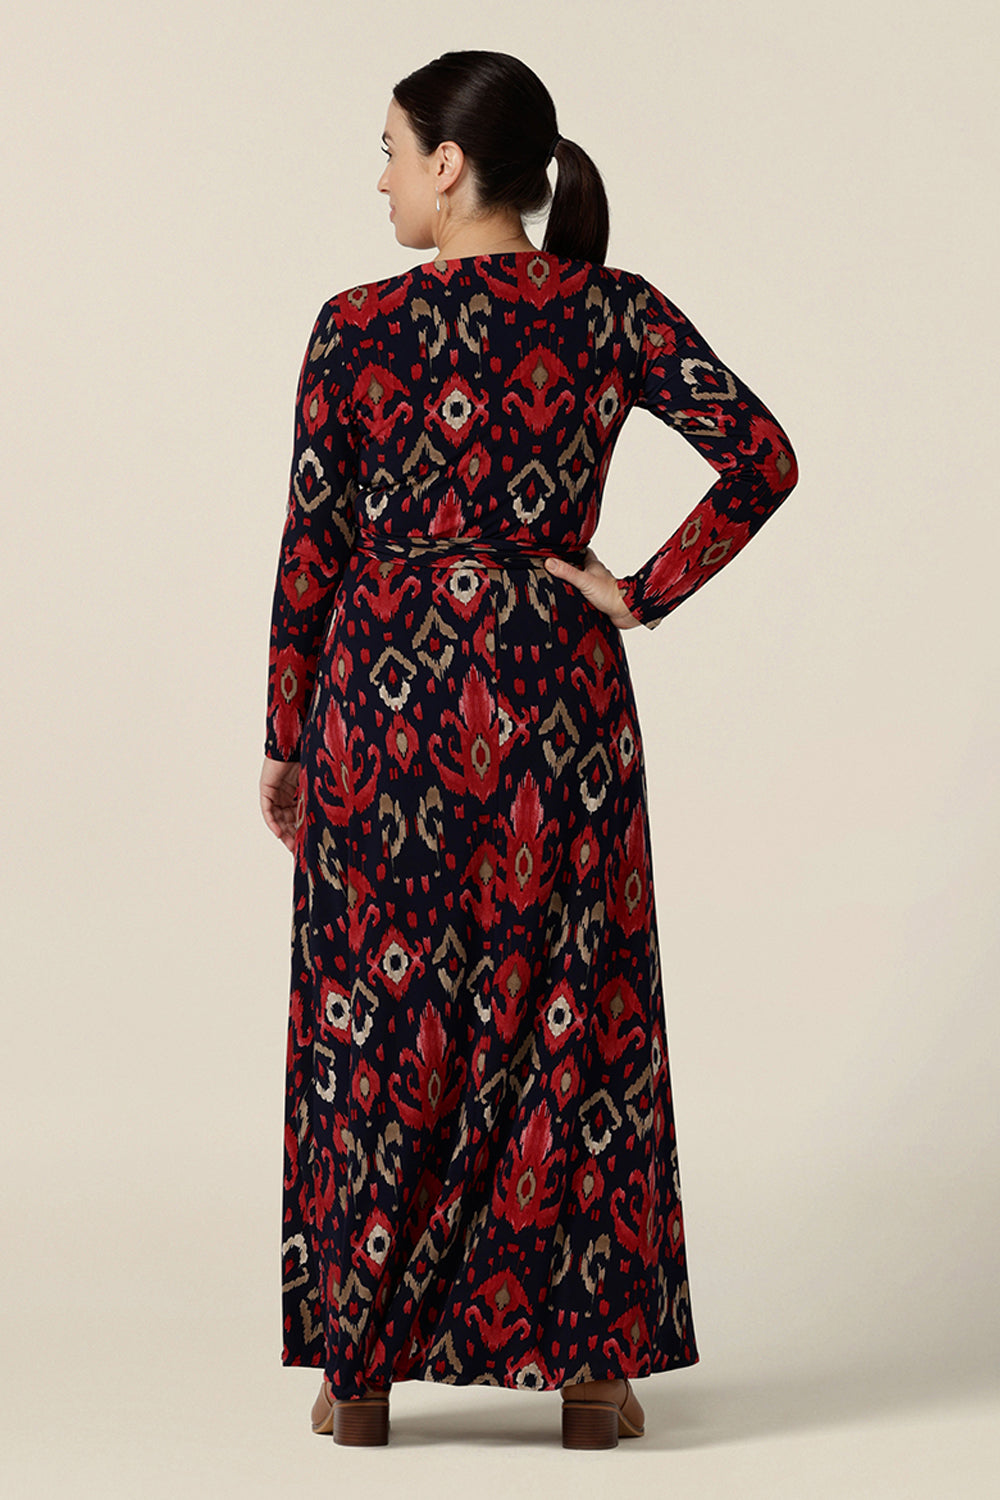 Back view of printed maxi dress, the Kimberly Maxi Dress in Ikat is a full length jersey wrap dress with long sleeves. Shown on a size 10 woman, this maxi dress is made in Australia in sizes 8 to 24.